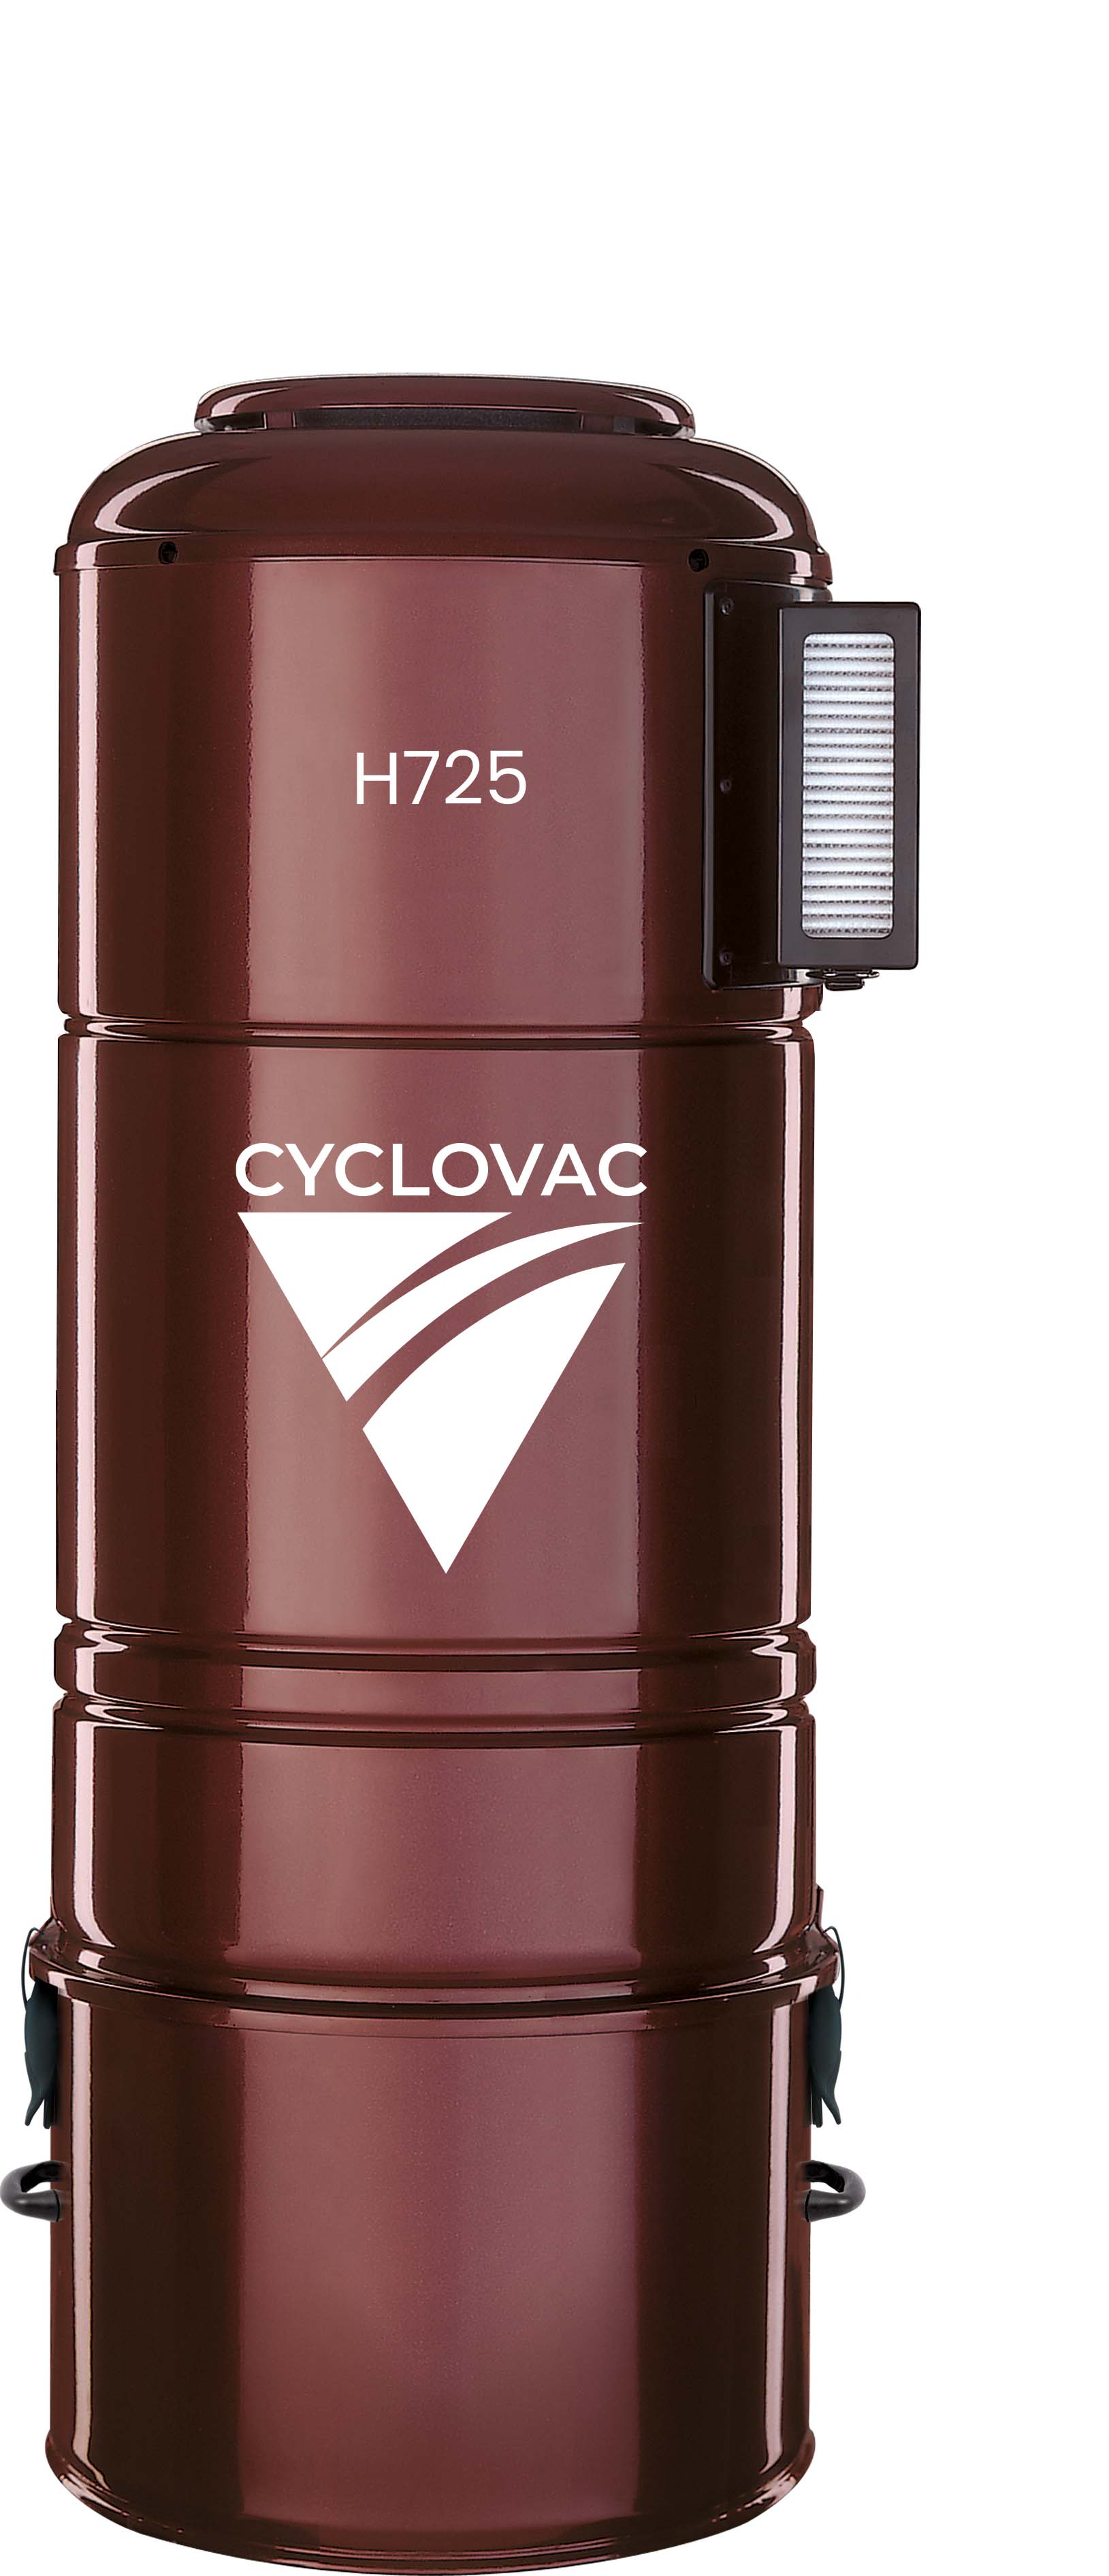 Cyclovac H725 Canister Central vacuum - Hybrid - Up to 10.000 Sq Ft (Best Seller) - Super Vacs Vacuums